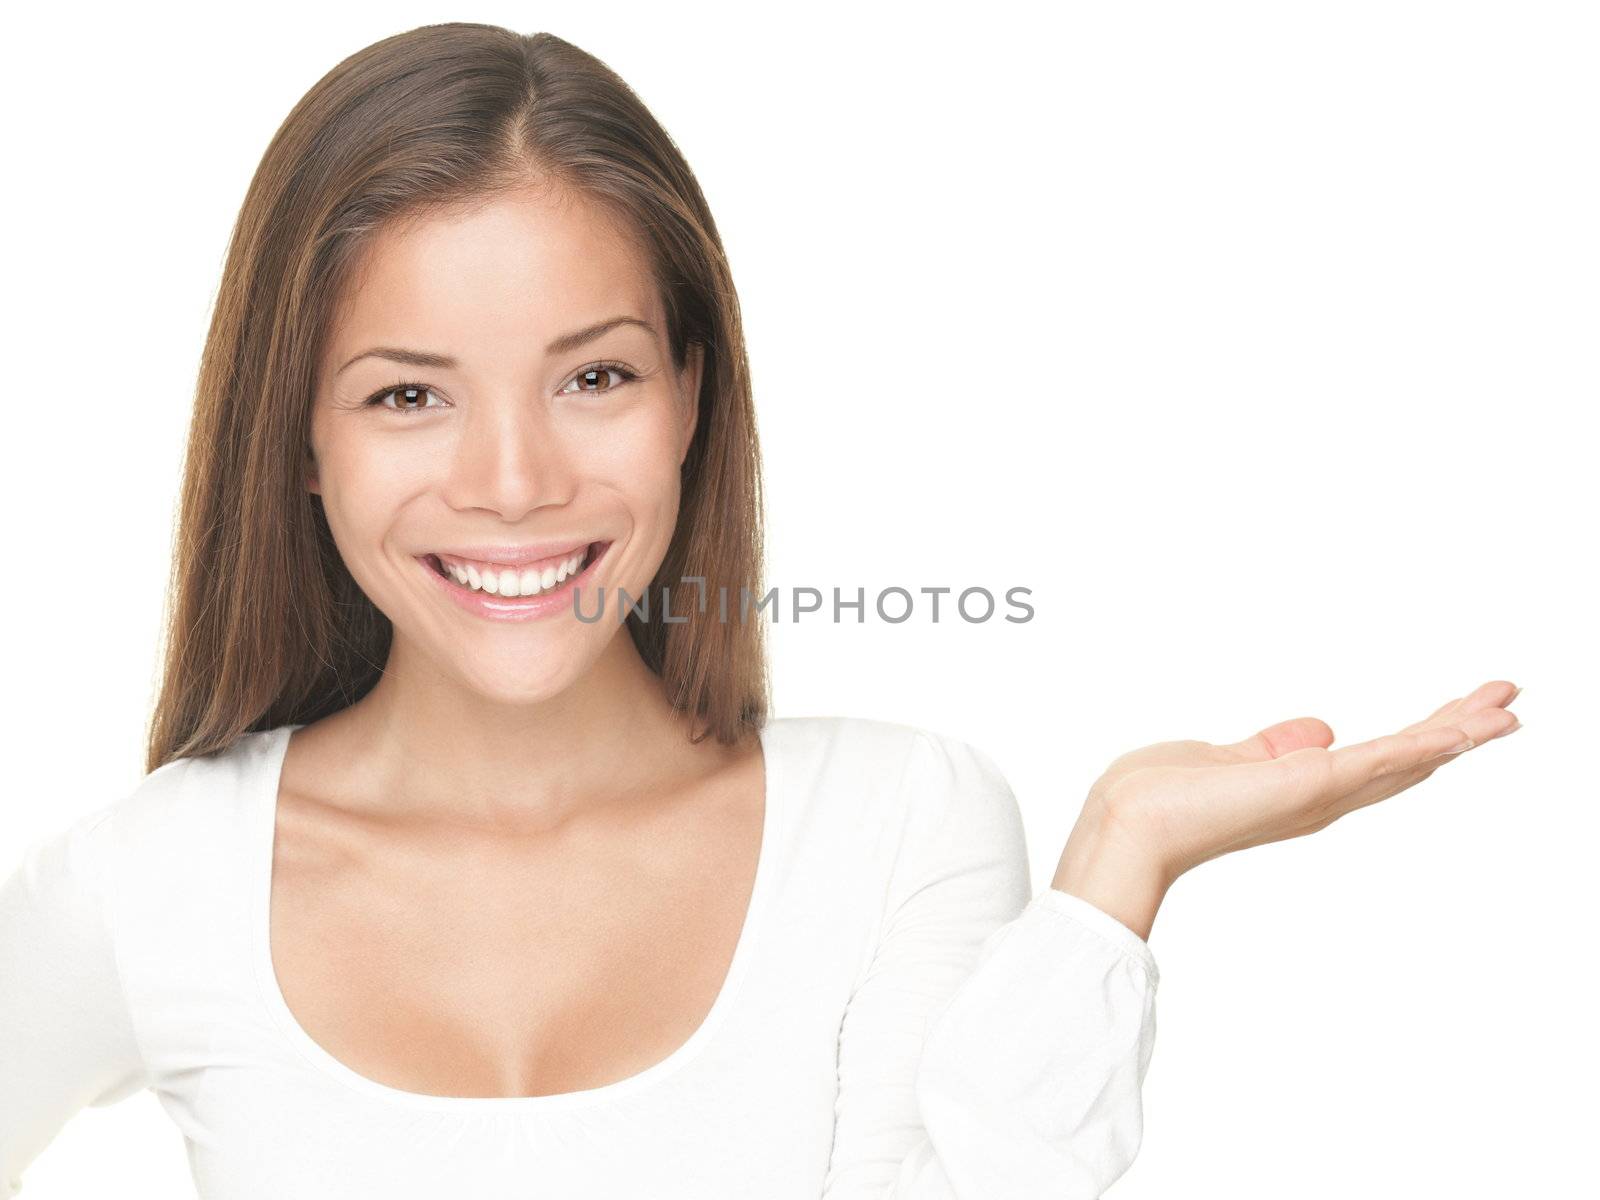 Smiling woman showing copy space for product with open hand palm - smiling friendly expression, Isolated on white background. Mixed Asian / Caucasian model. 